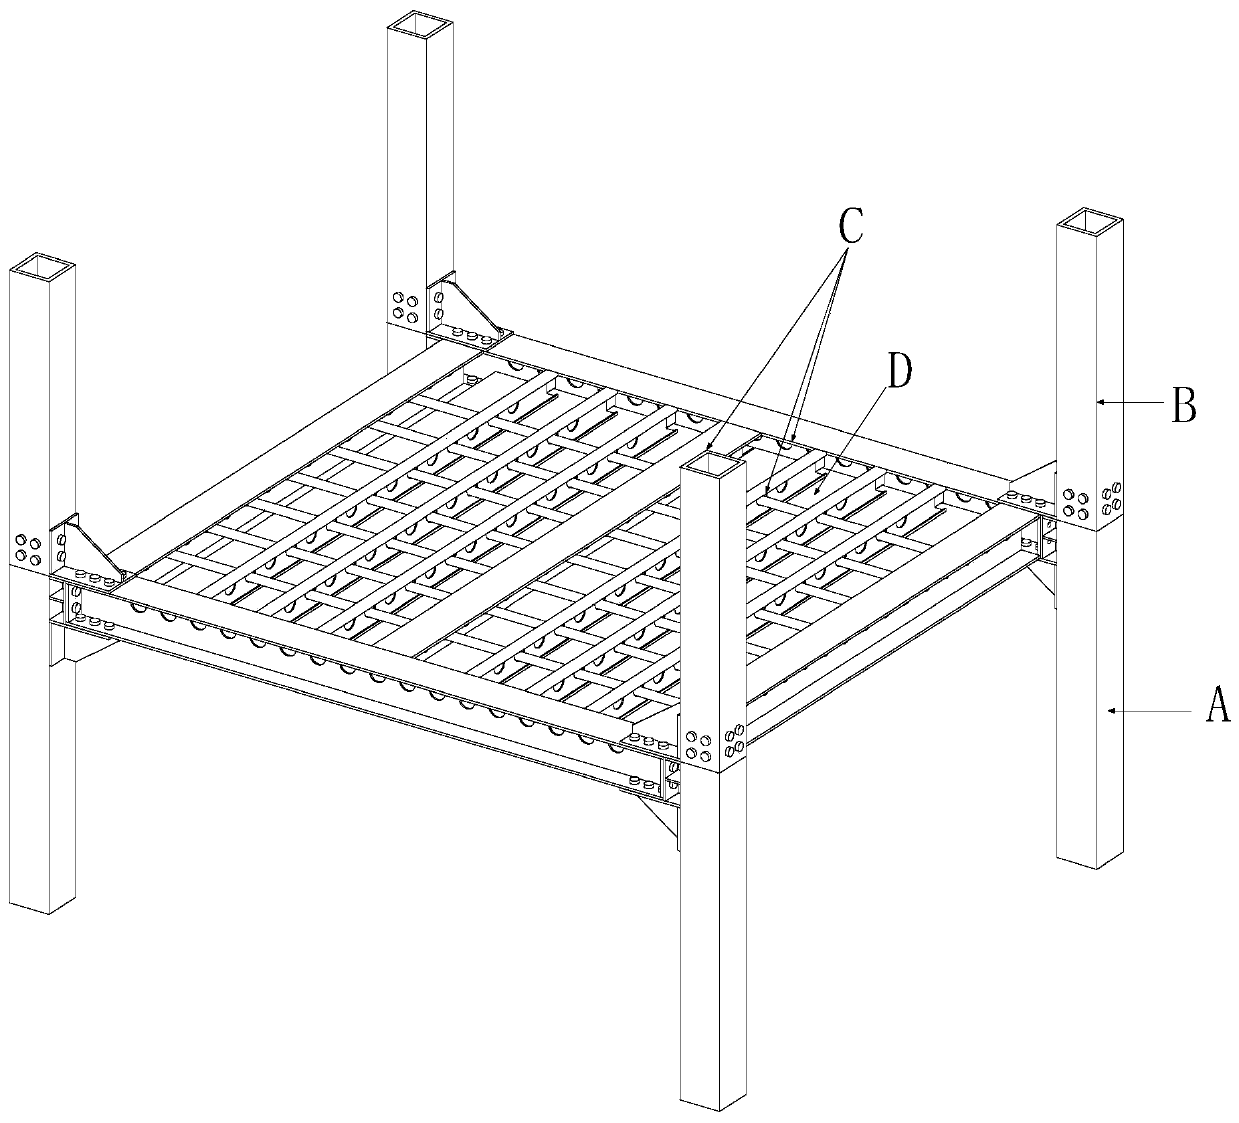 Fabricated type building system based on inner insertion plate and end plate connection beam-column joint